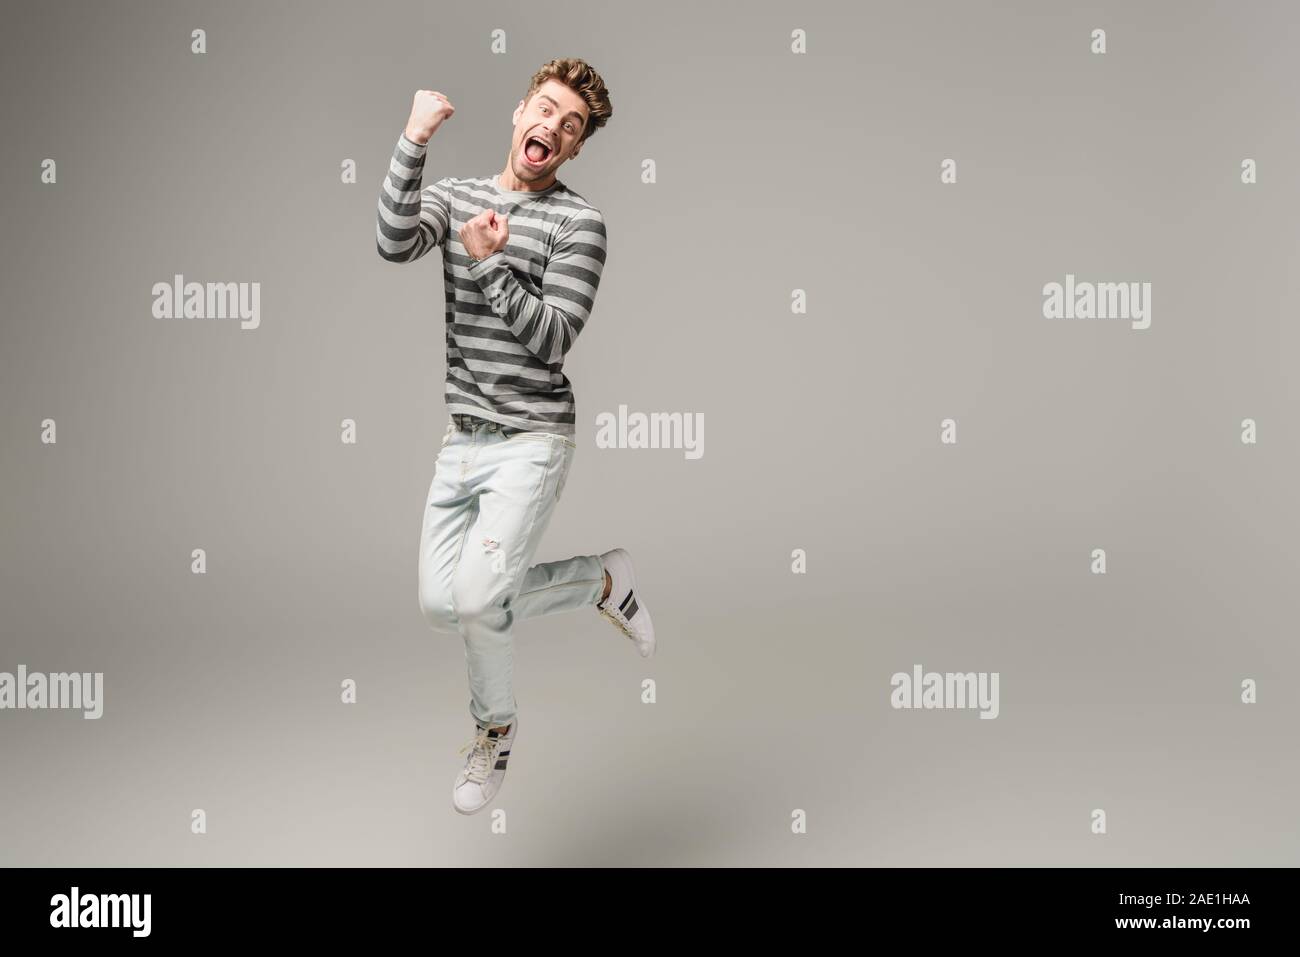 excited screaming man jumping and cheering on grey Stock Photo